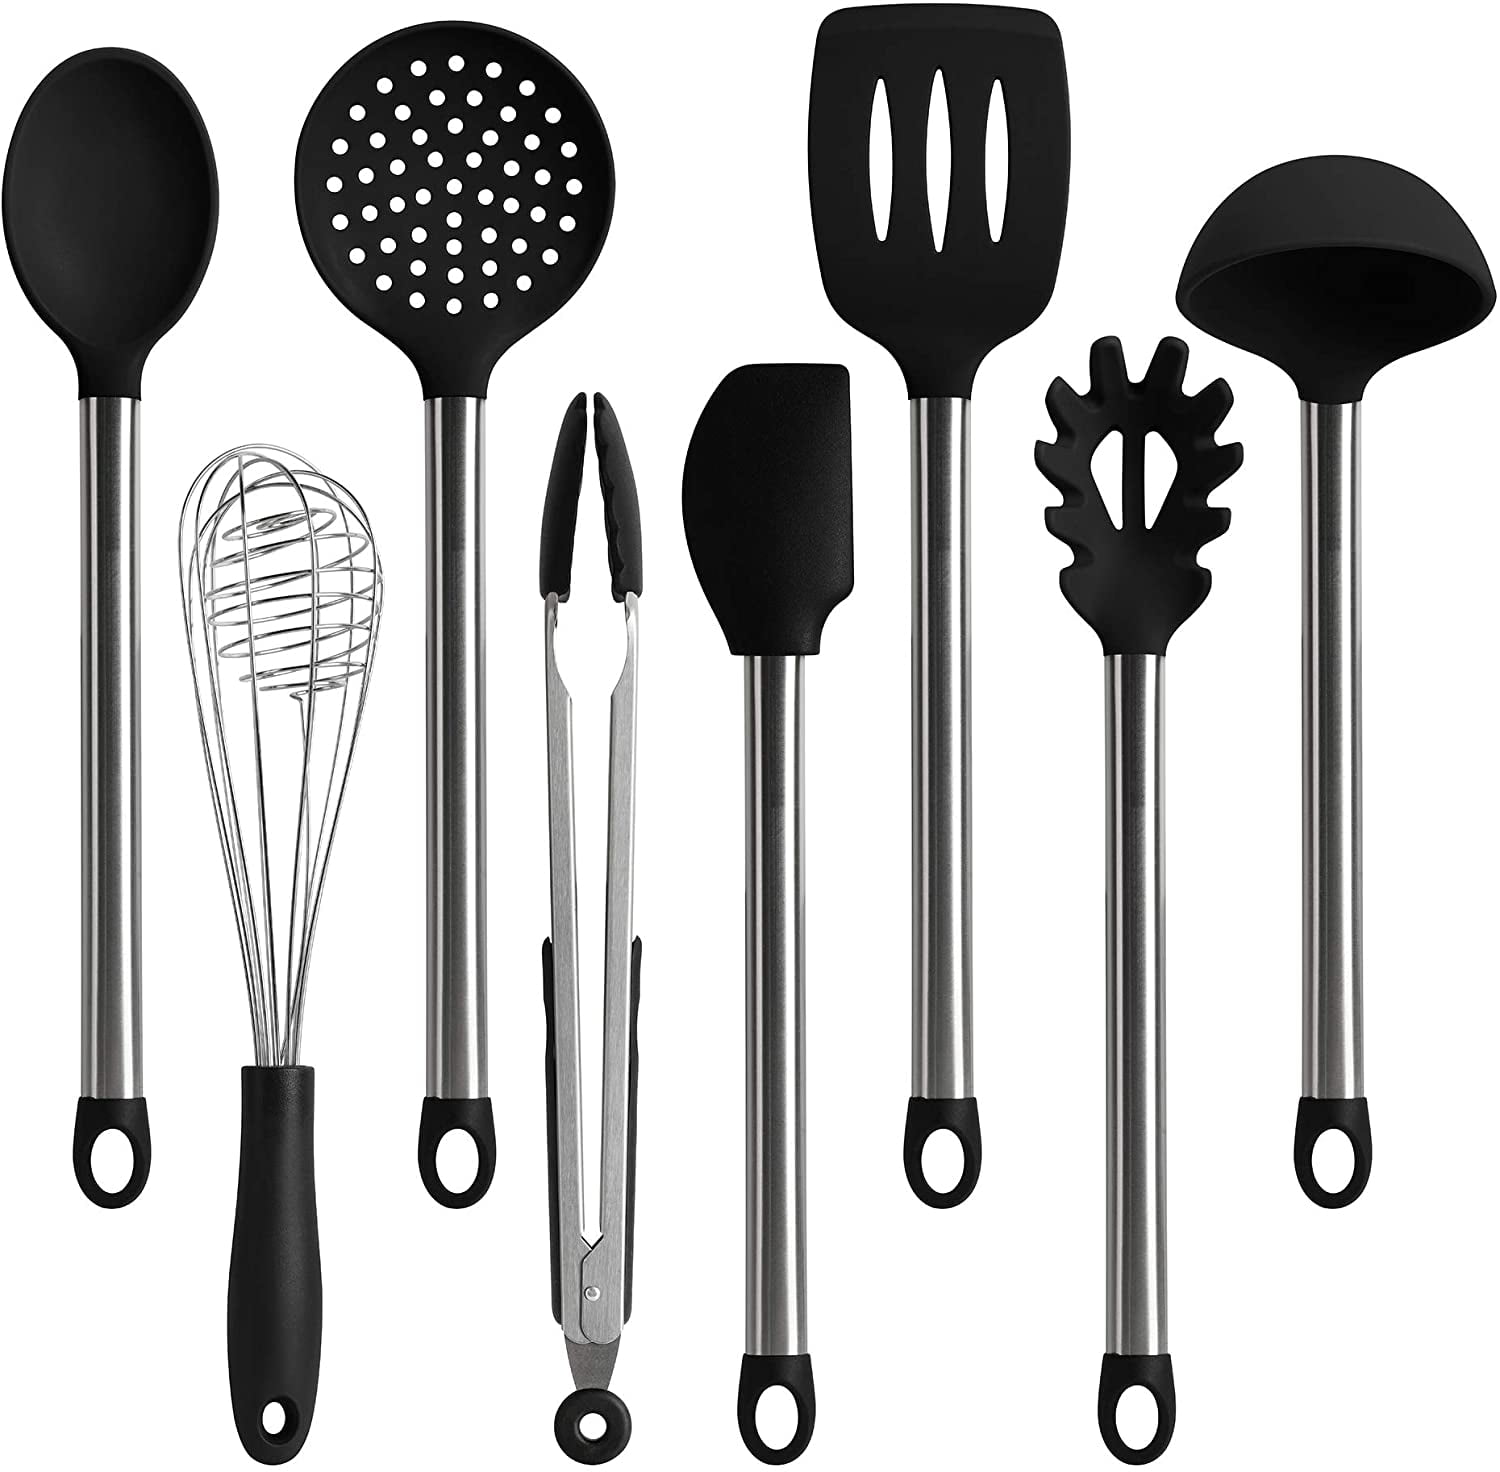 8 Piece Non-Stick Kitchen Utensil Set Stainless Steel & Silicone Cooking Ware 